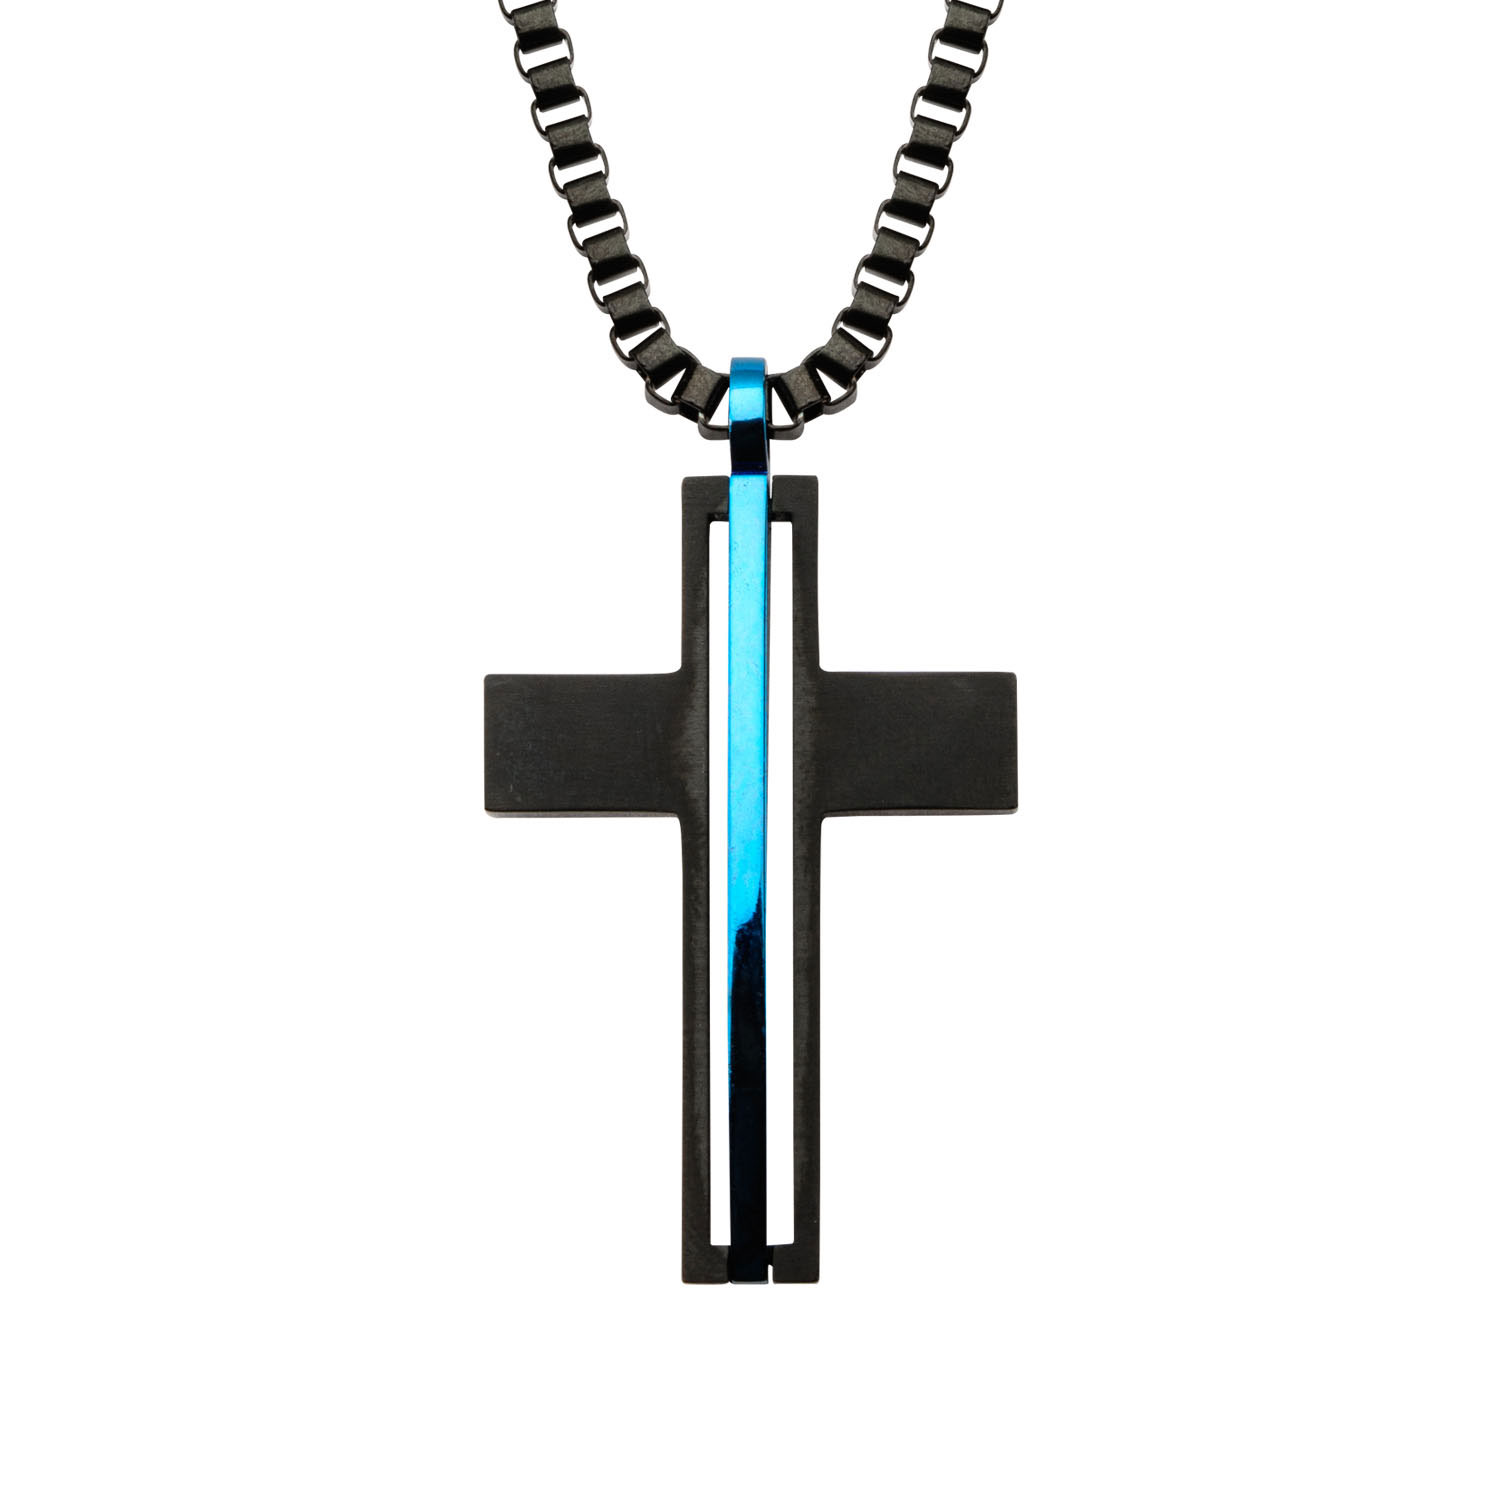 Matte Black Plated with Thin Blue Line Pendant with Chain Lewis Jewelers, Inc. Ansonia, CT